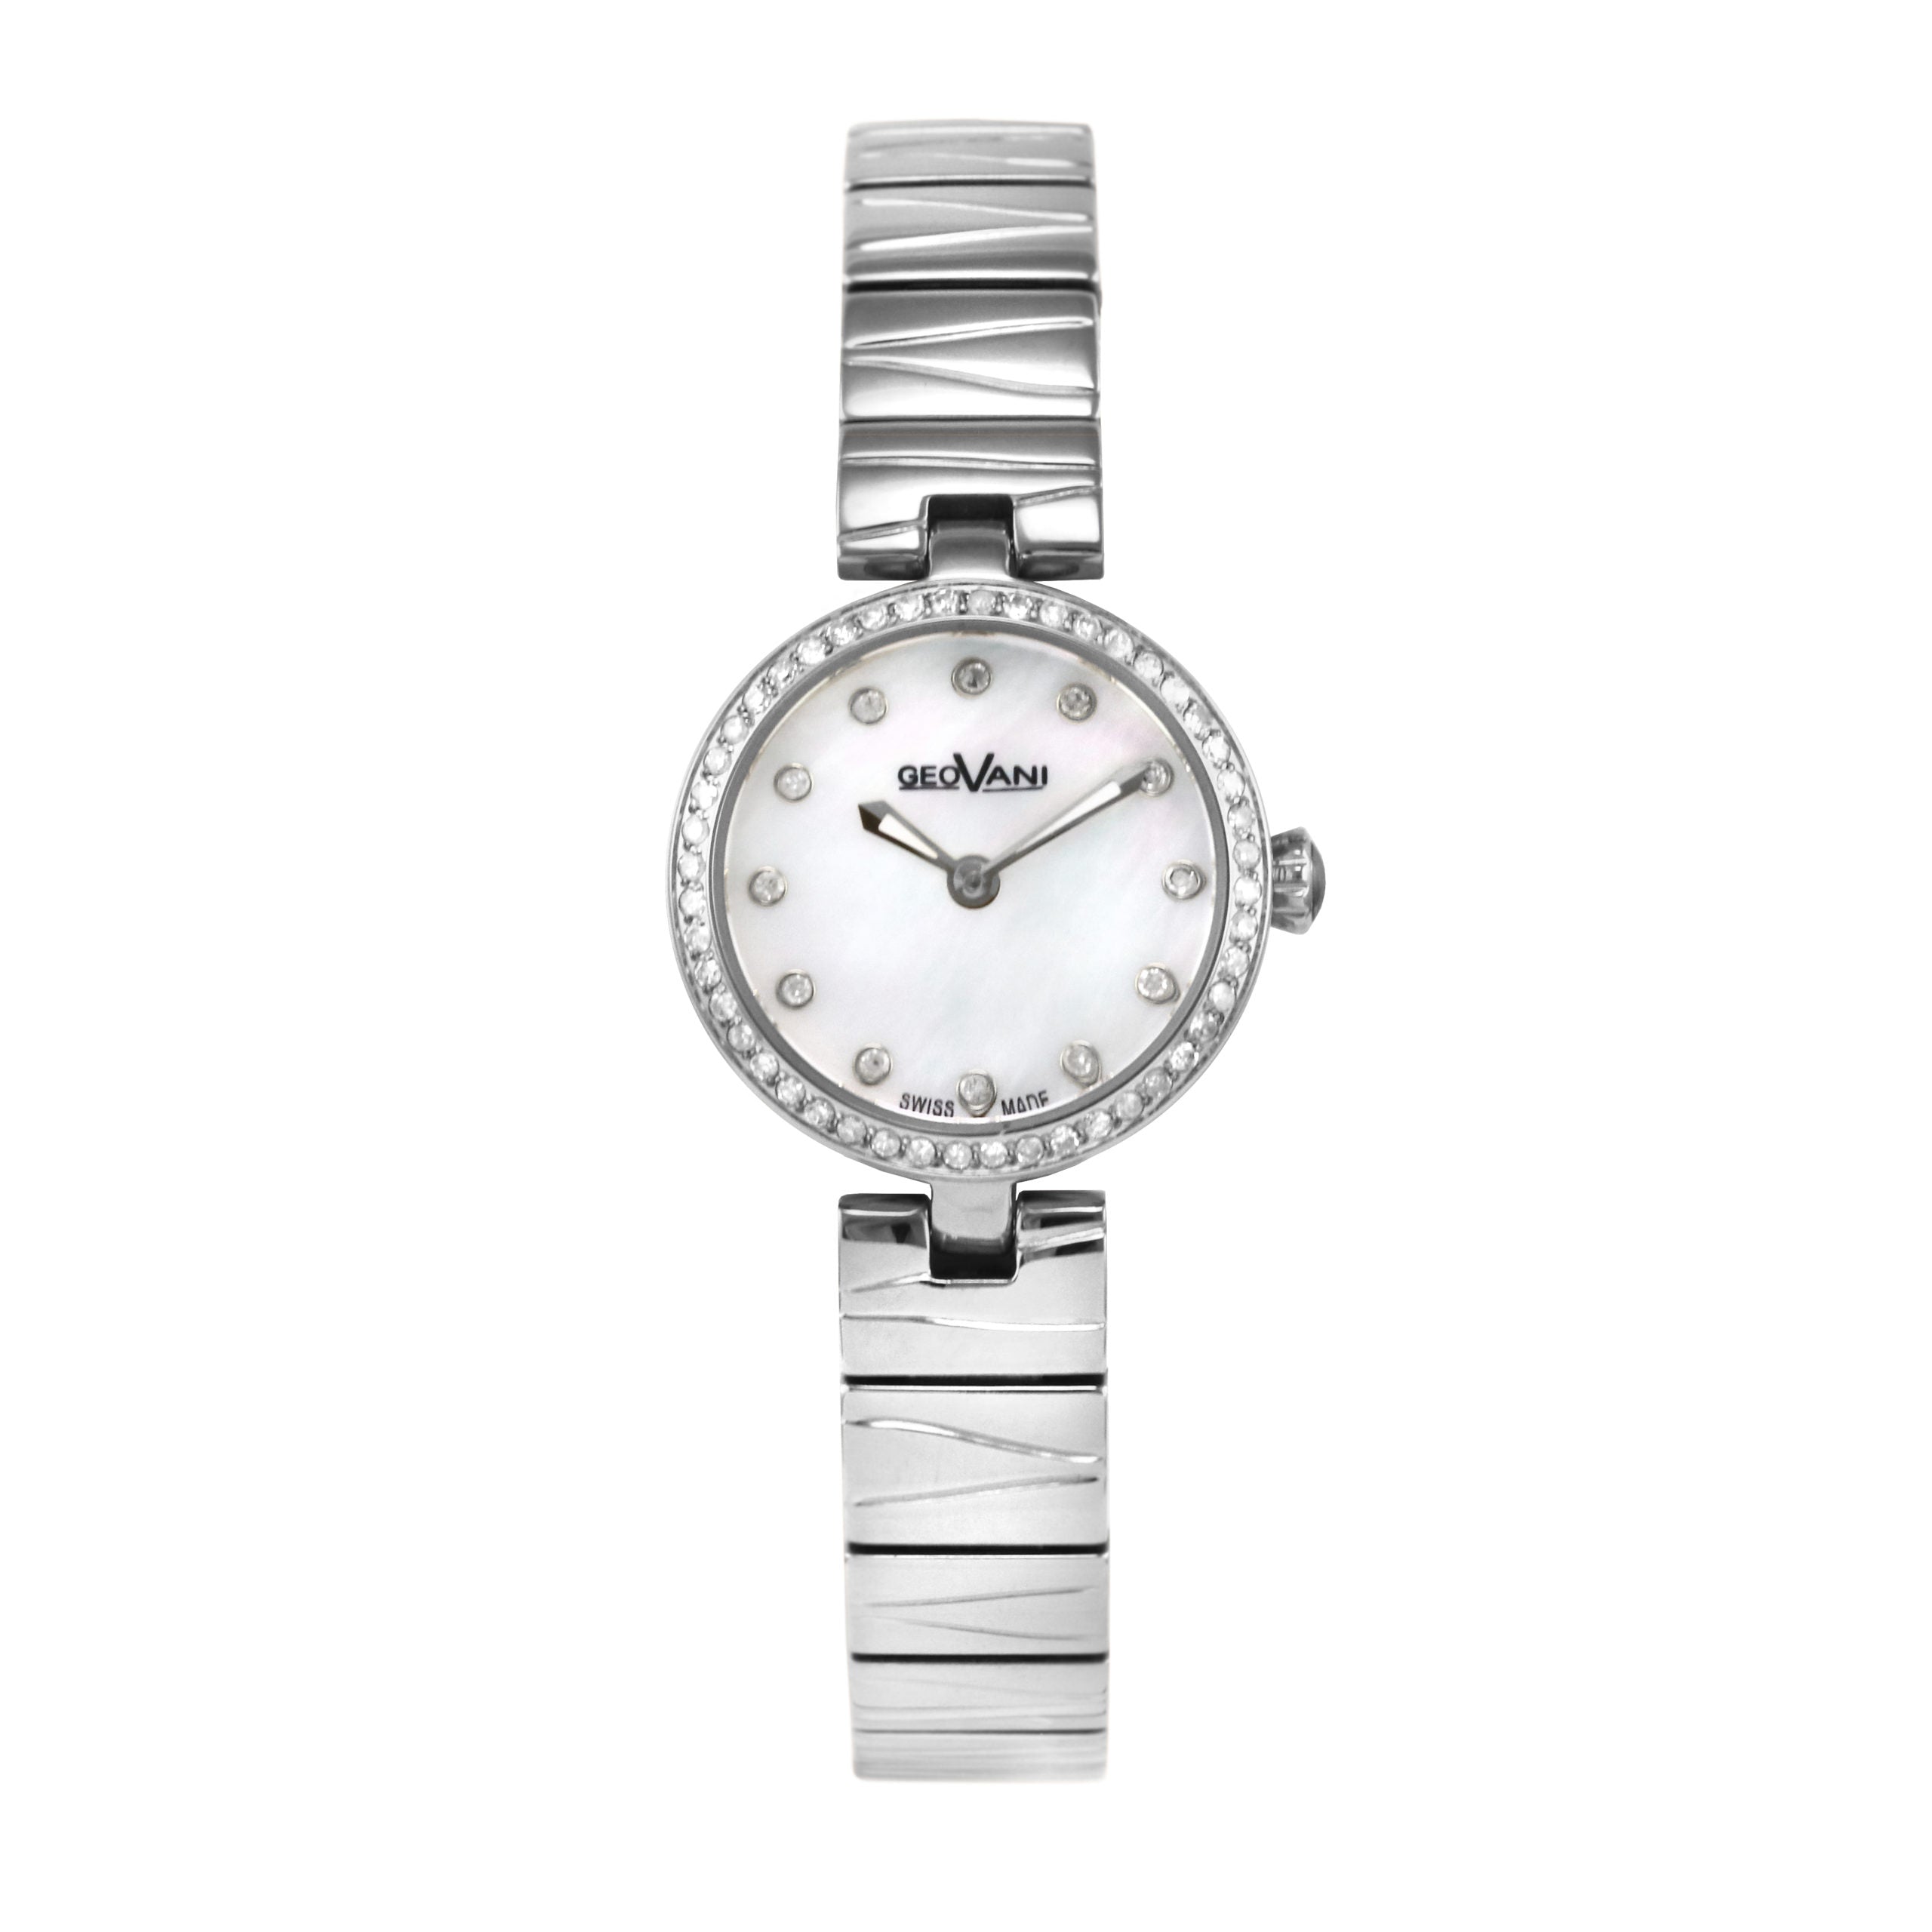 Giovanni Women's Swiss Quartz Watch with Pearly White Dial - GEO-0002